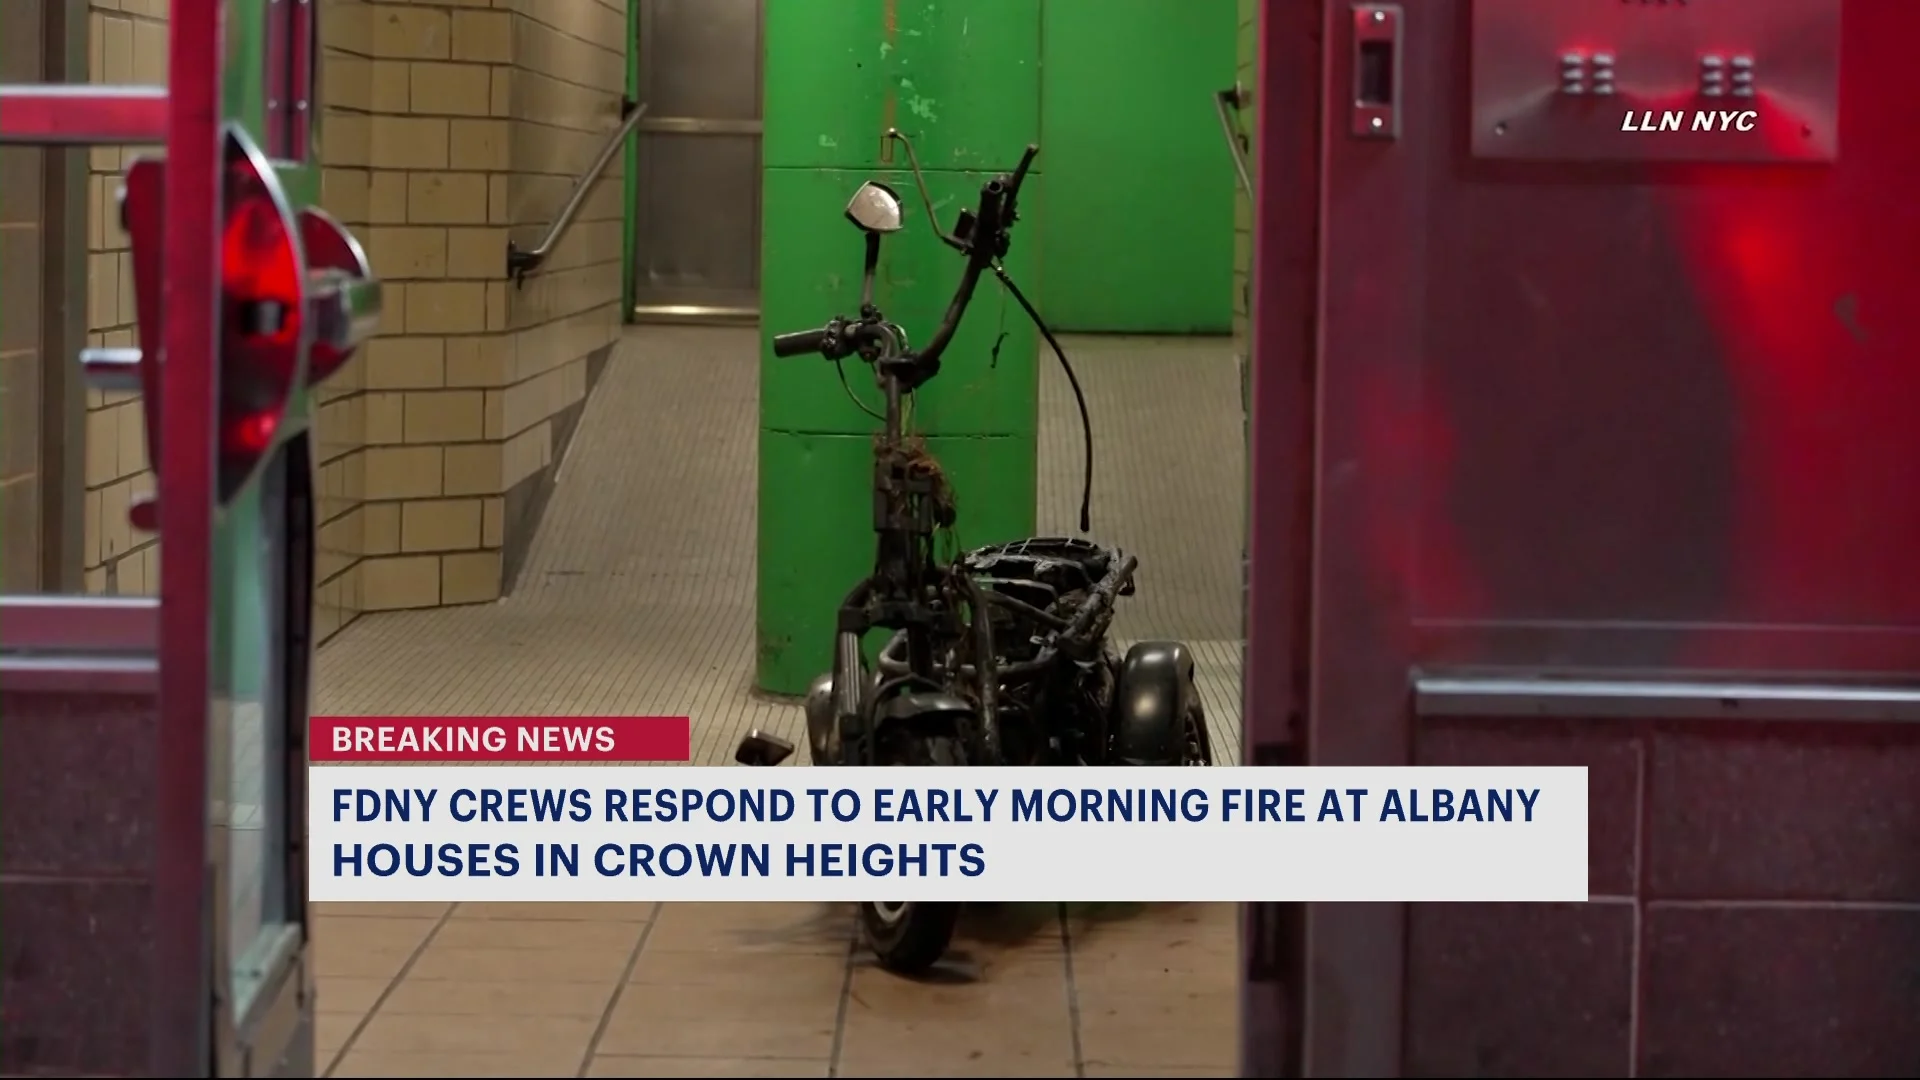 Firefighters find e-bike in aftermath of Albany Houses fire in Brooklyn